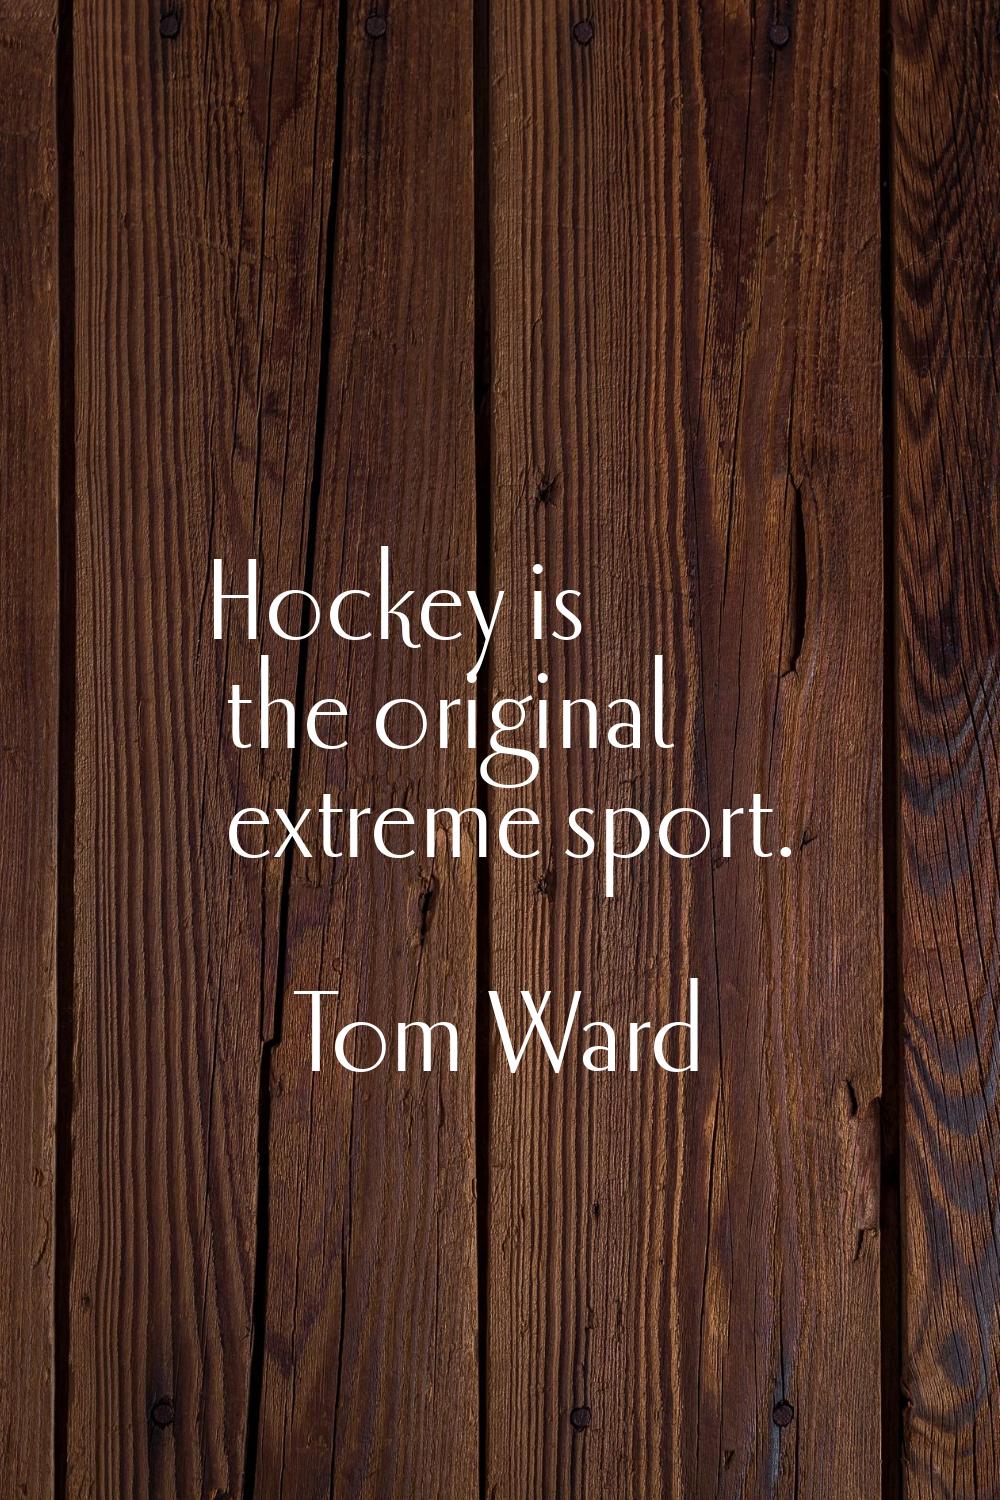 Hockey is the original extreme sport.